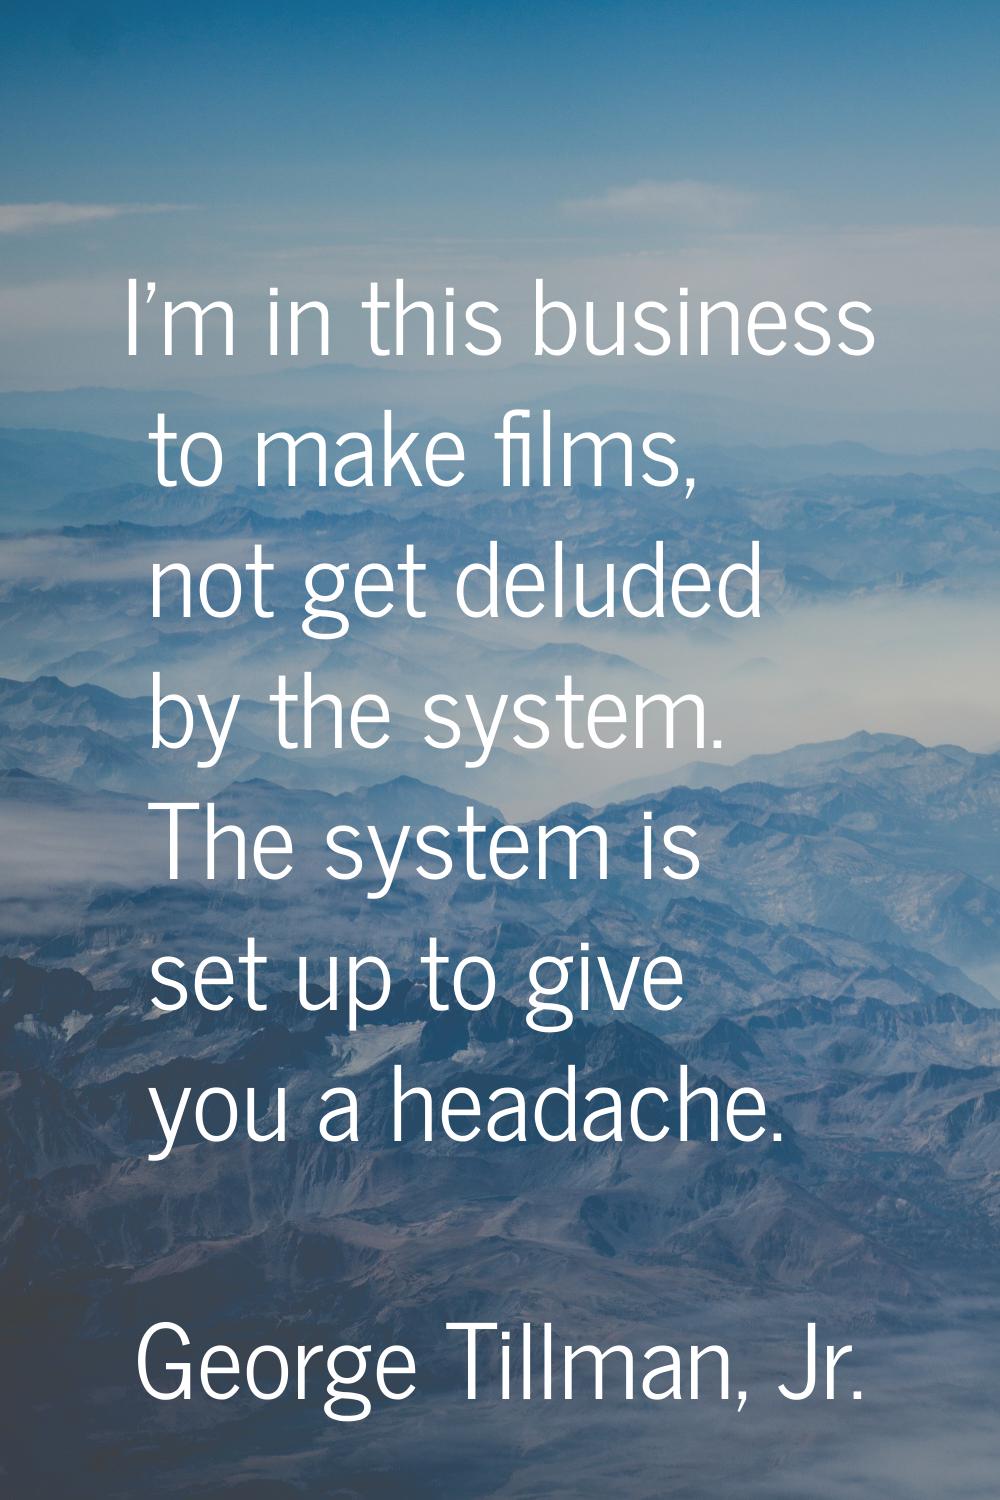 I'm in this business to make films, not get deluded by the system. The system is set up to give you